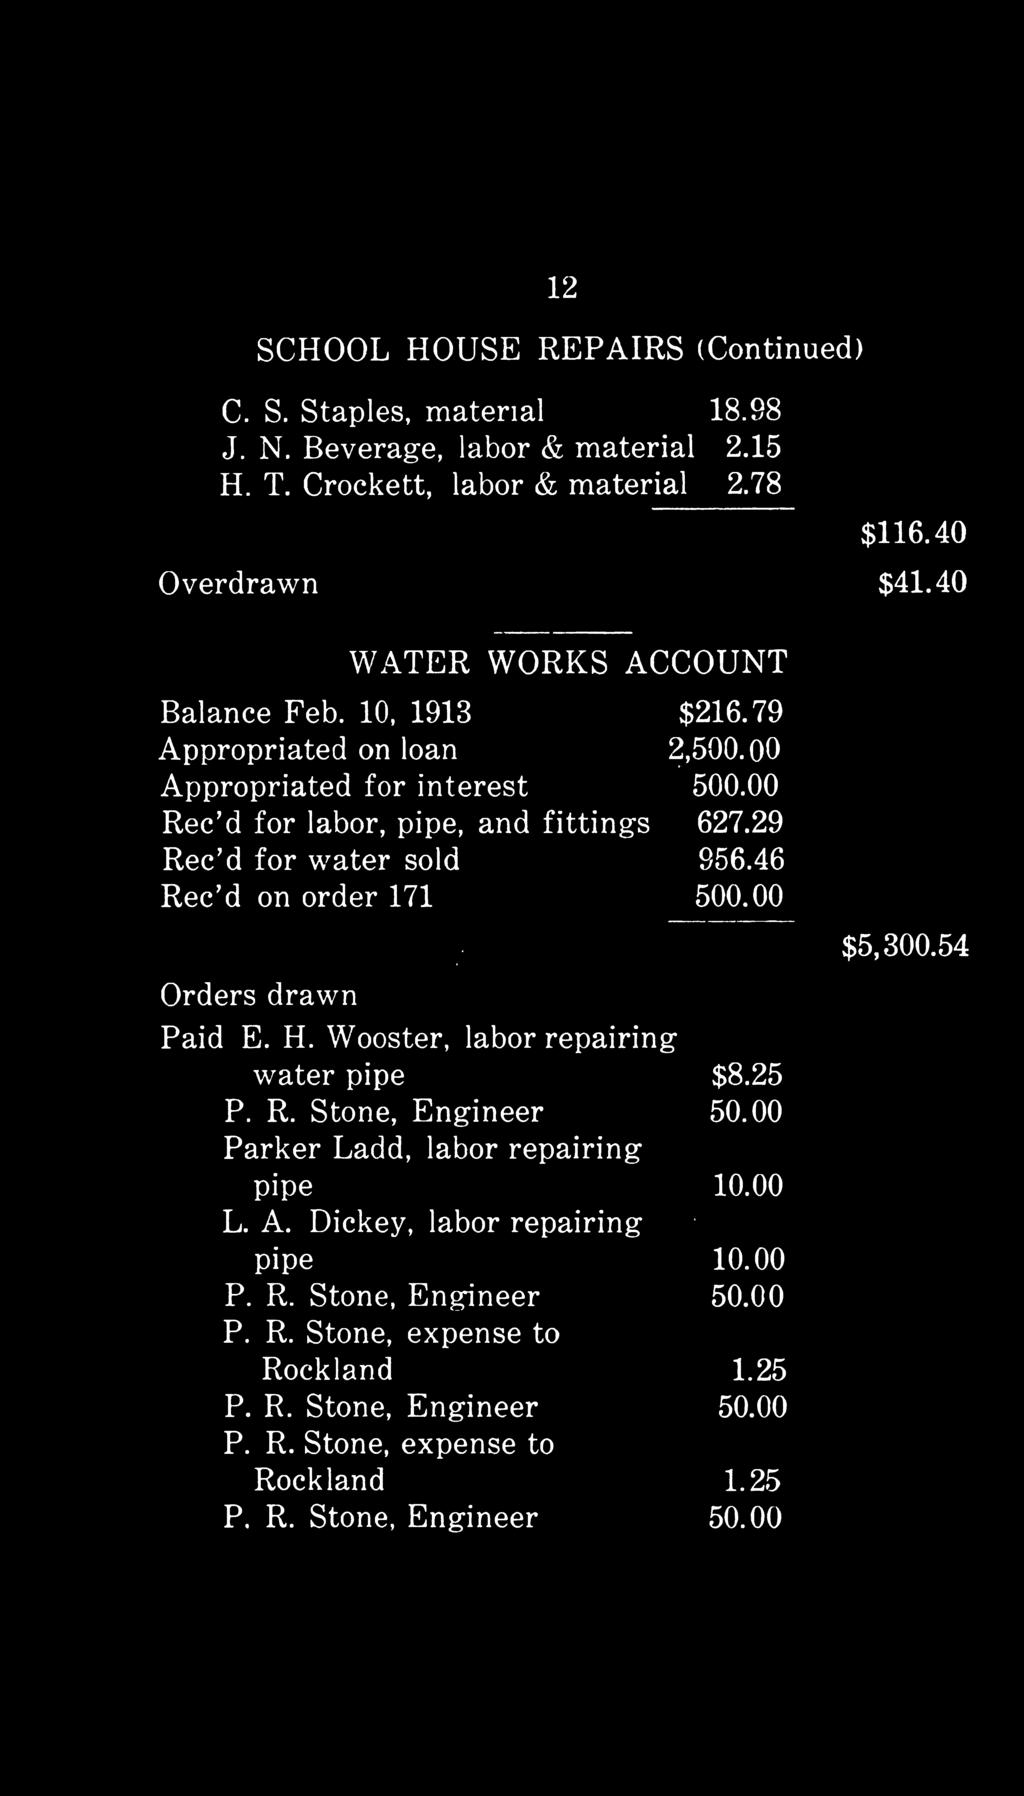 29 Rec d for water sold 956.46 Rec d on order 171 500.00 # $5,300.54 Orders drawn Paid E. H. Wooster, labor repairing water pipe $8.25 P. R. Stone, Engineer 50.